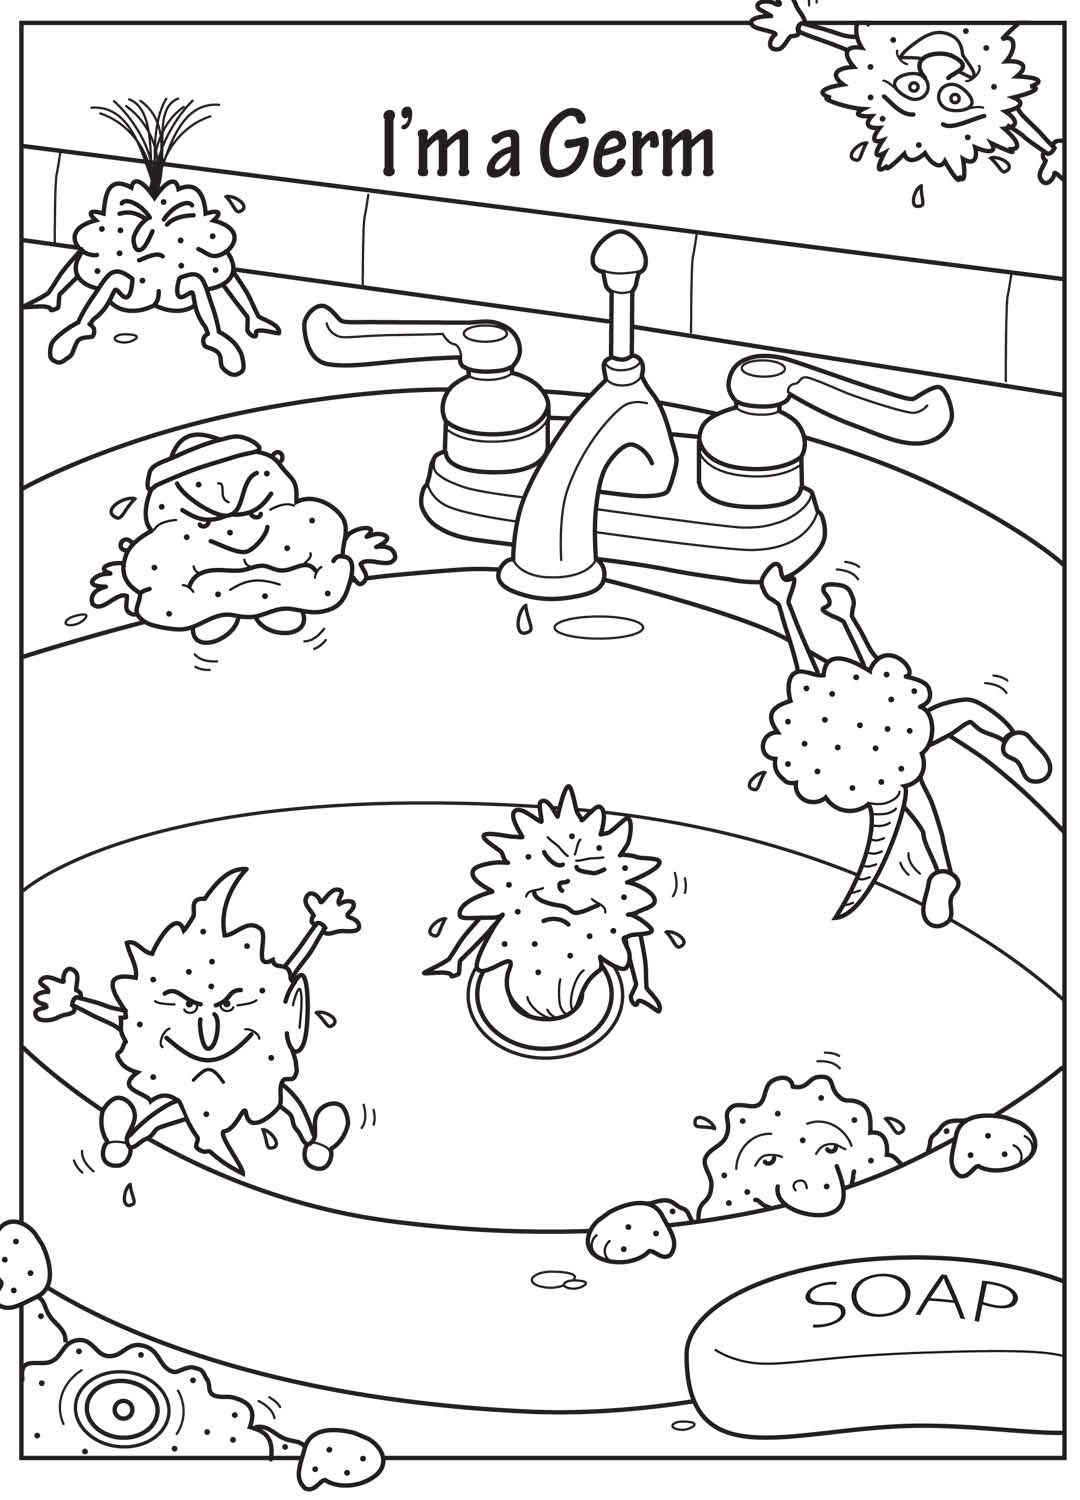 Germs coloring #14, Download drawings